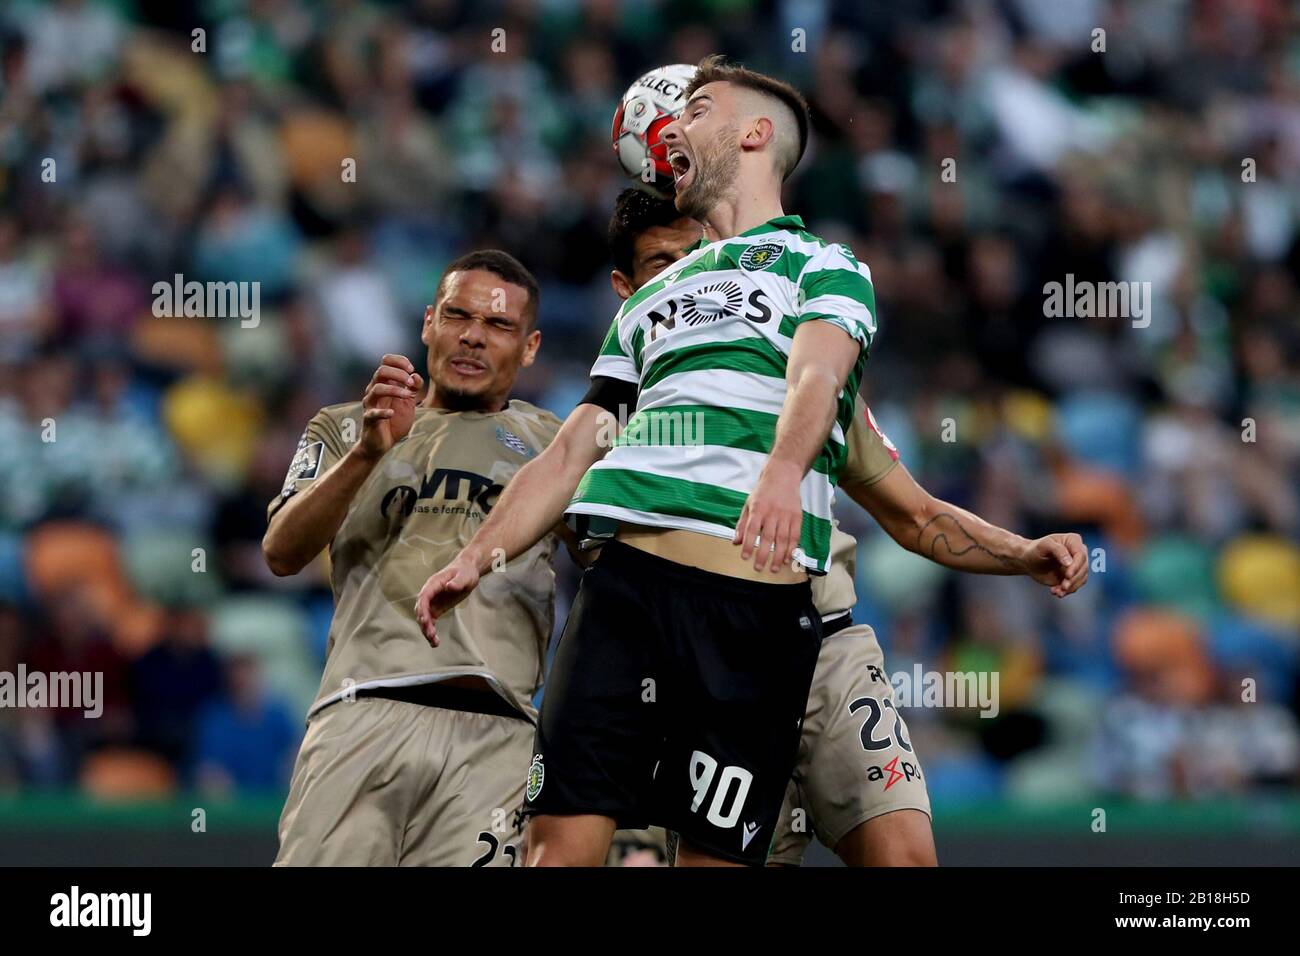 Lisbon, Portugal. 23rd Feb, 2020. Andraz Sporar (front) of Sporting CP competes during the Primeira Liga football match between Sporting CP and Boavista FC in Lisbon, Portugal, on Feb. 23, 2020. Credit: Pedro Fiuza/Xinhua/Alamy Live News Stock Photo